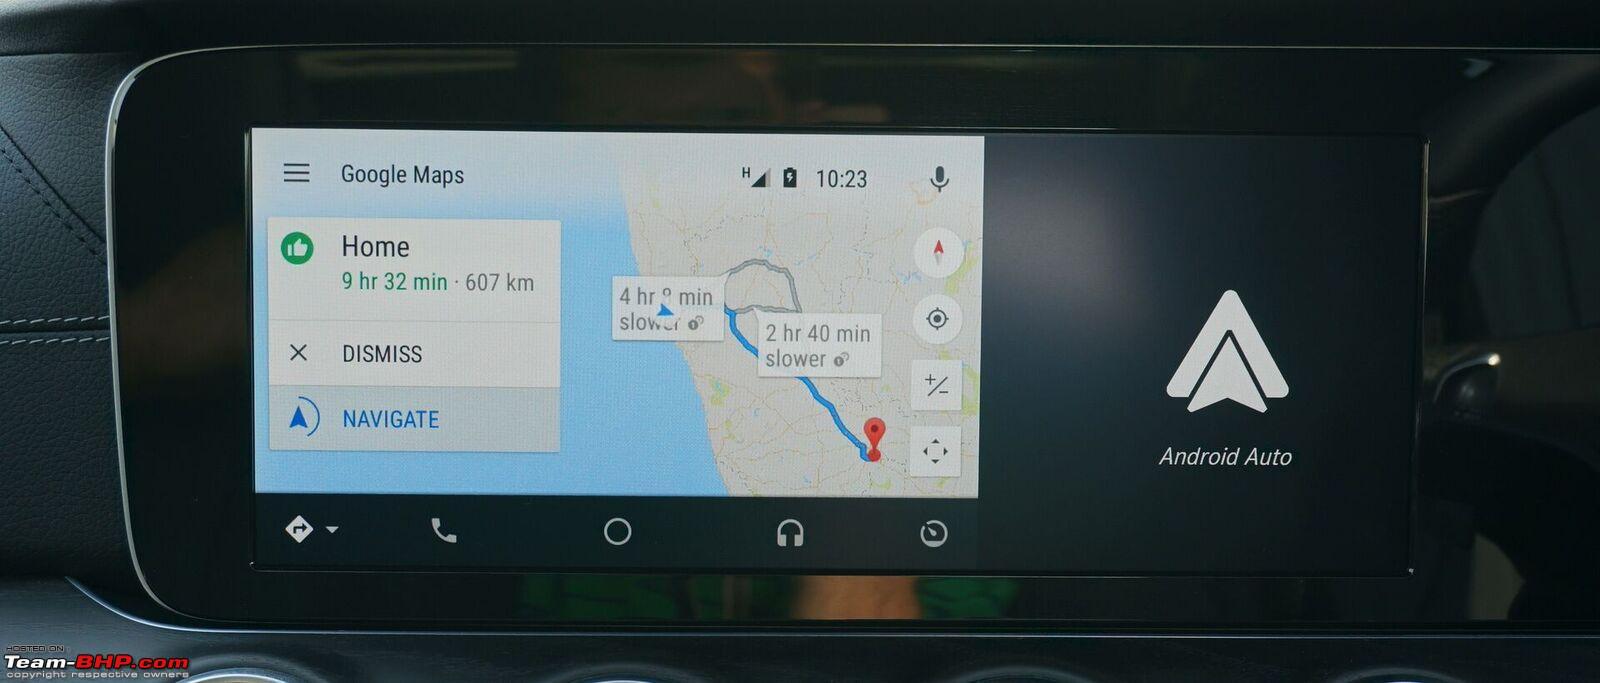 Android Auto Wireless now available on select phones - Team-BHP